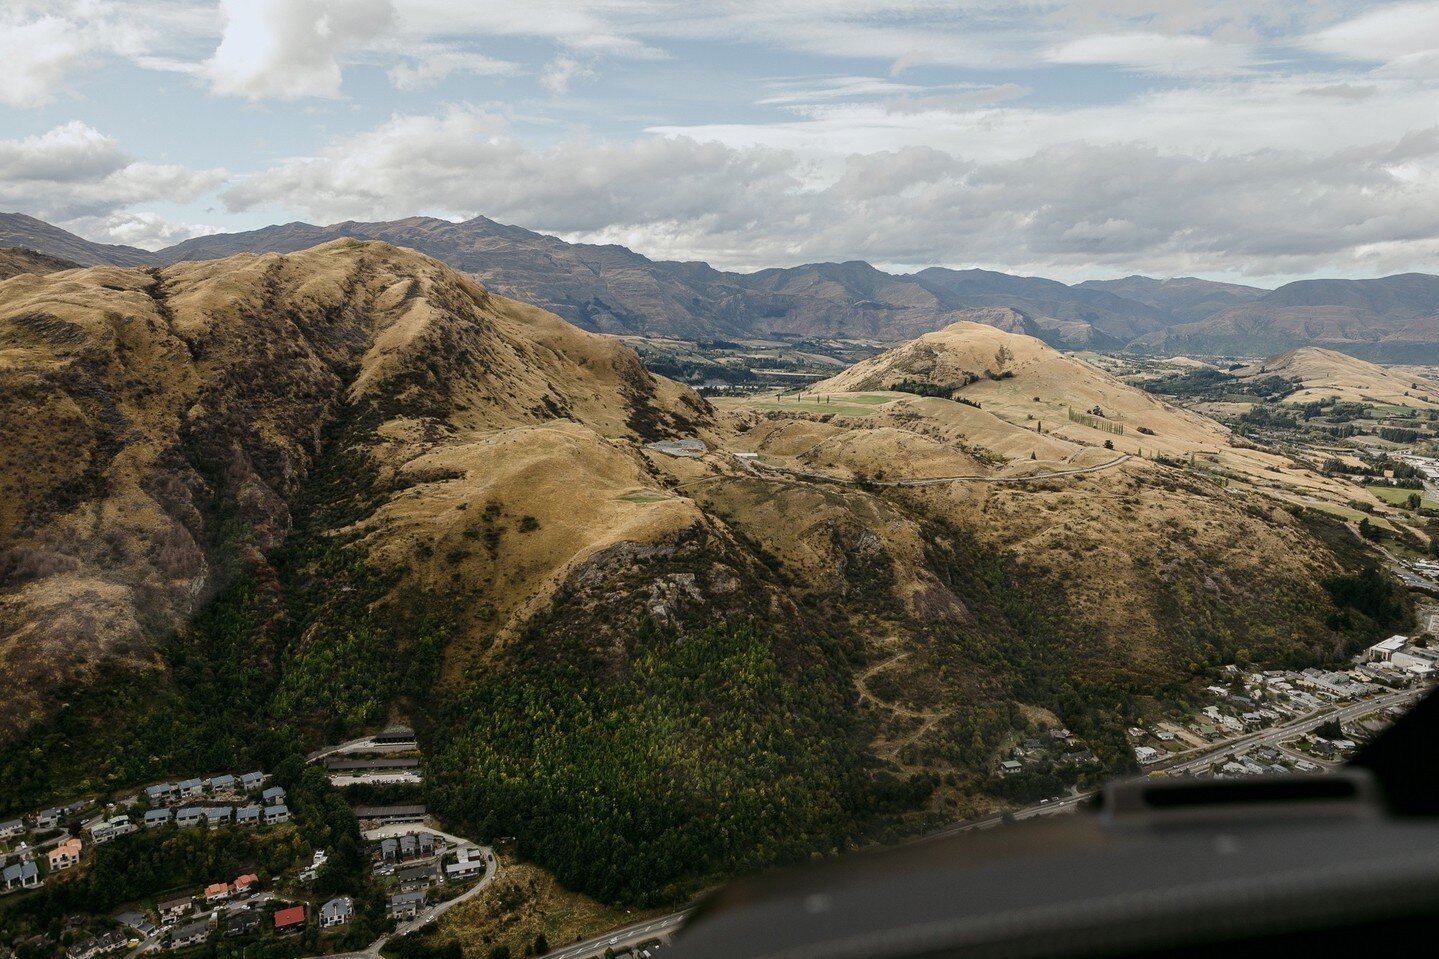 Can you spot us? Located between the two peaks of Queenstown hill, you might see a little white marquee snuggled into the hillside. That's our Lake June marquee, and if you look closely you'll also see the famous Tussock Point too. ⁠
⁠
And, just on t